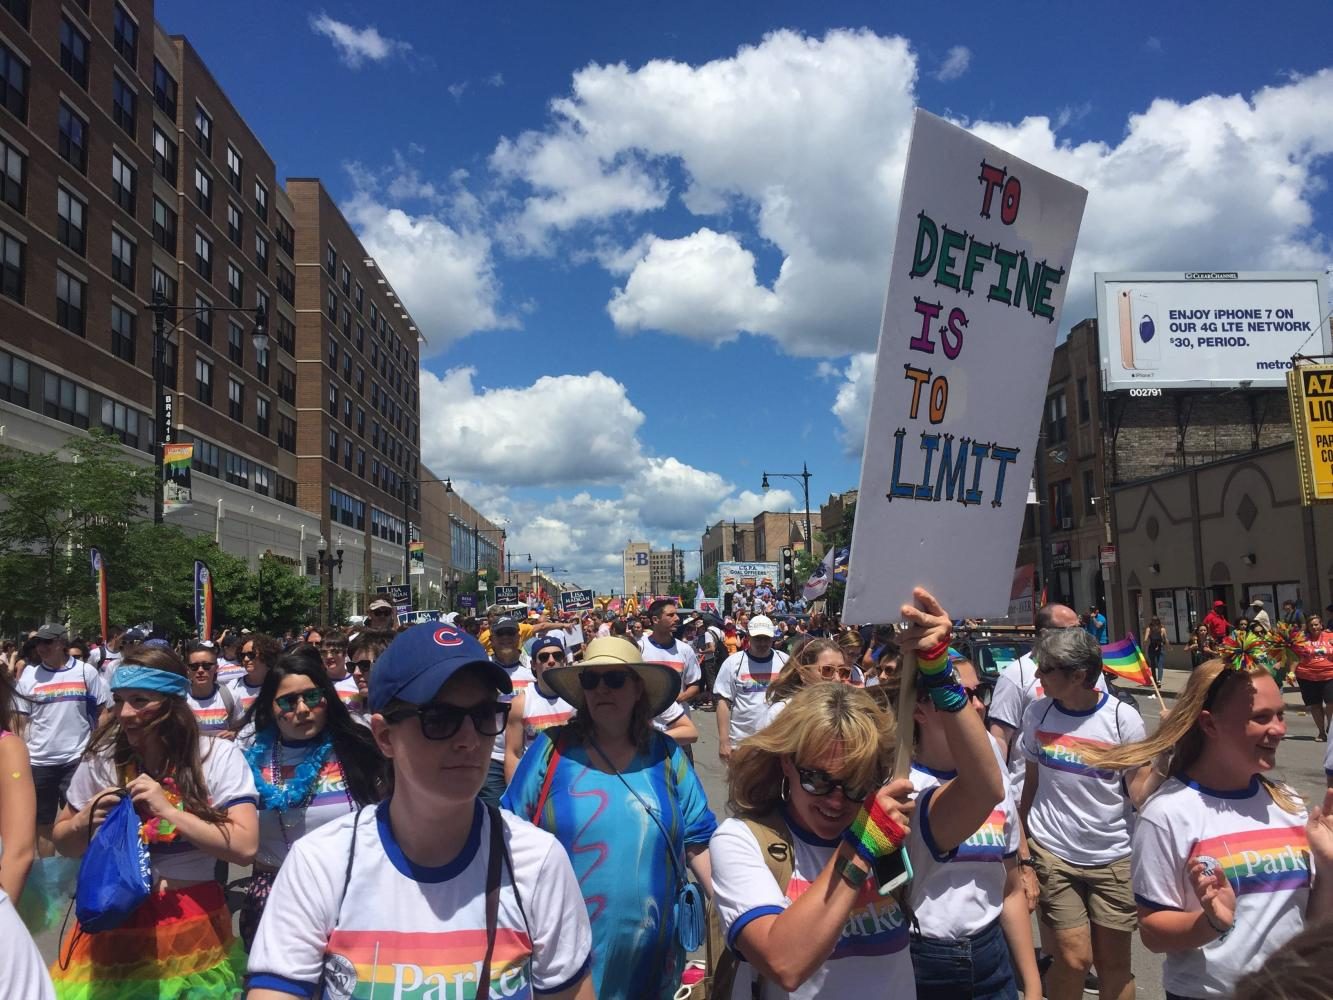 Sophomores Senna Gardener and Abri Berg, fourth grade teacher Miriam Pickus, upper school math teacher Chris Riff, and other members of the Parker community march in the Chicago Pride Parade.